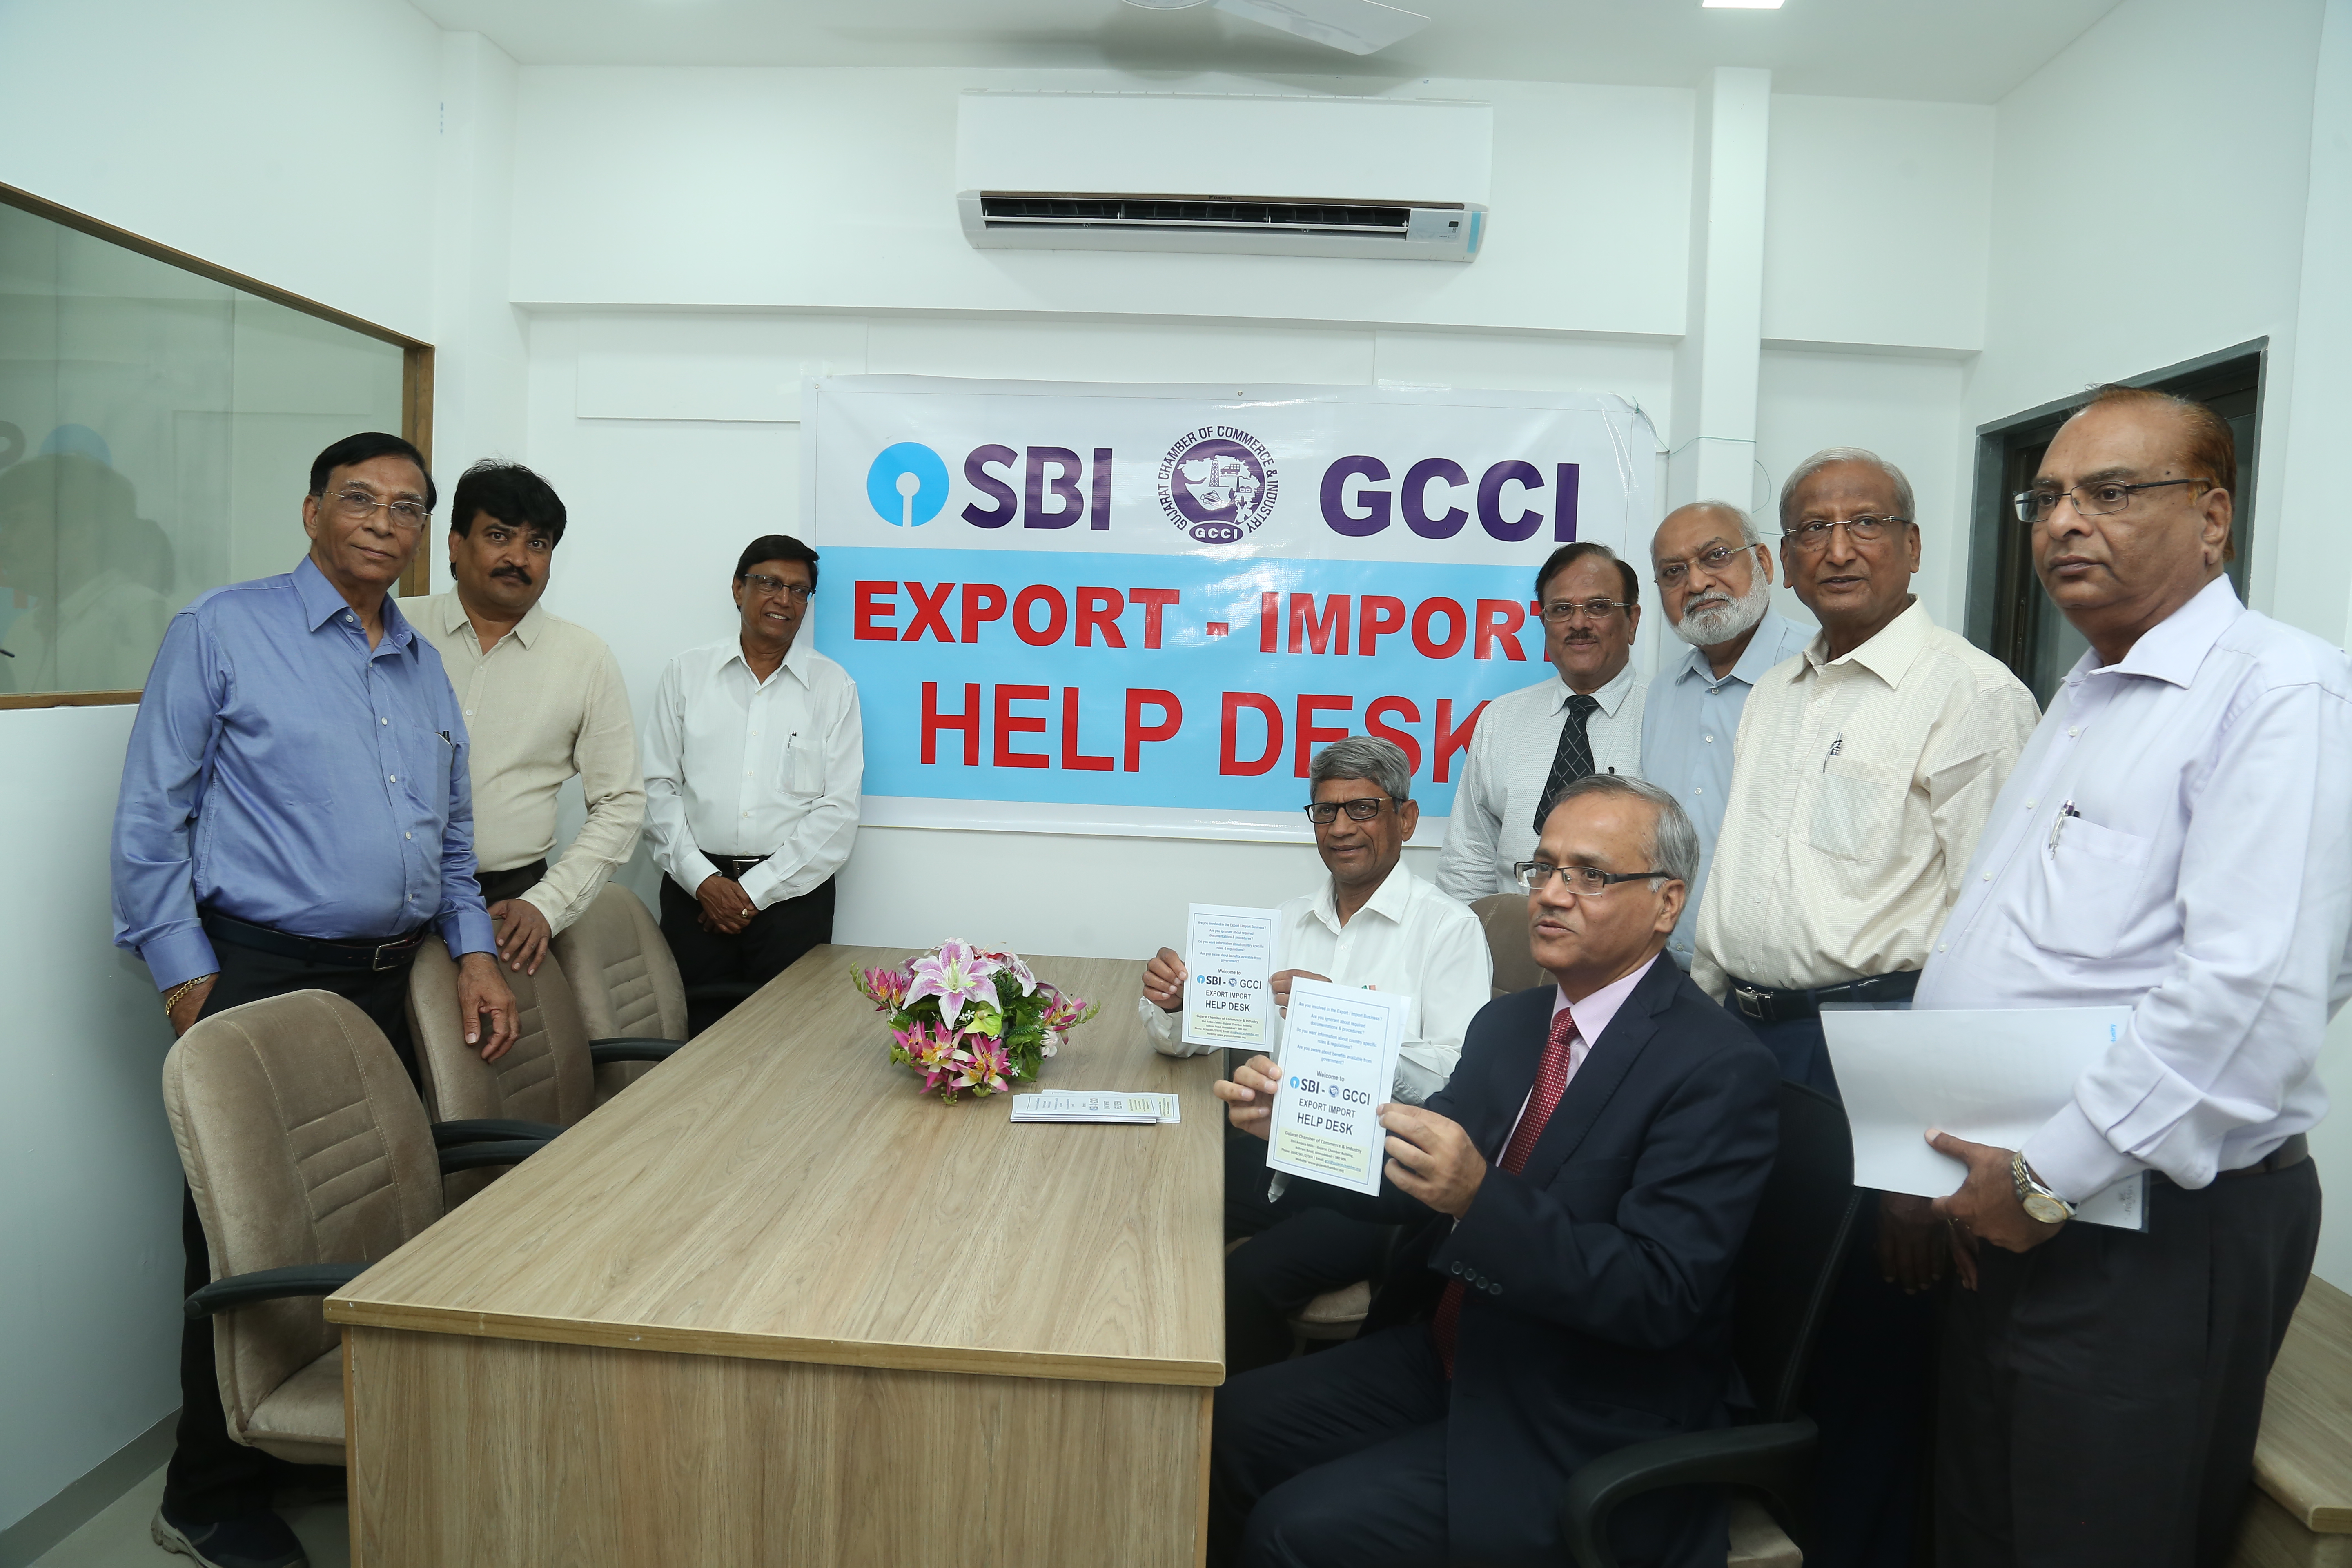 GCCI has set up an SBI- GCCI Export Import Help Desk which be officially launched